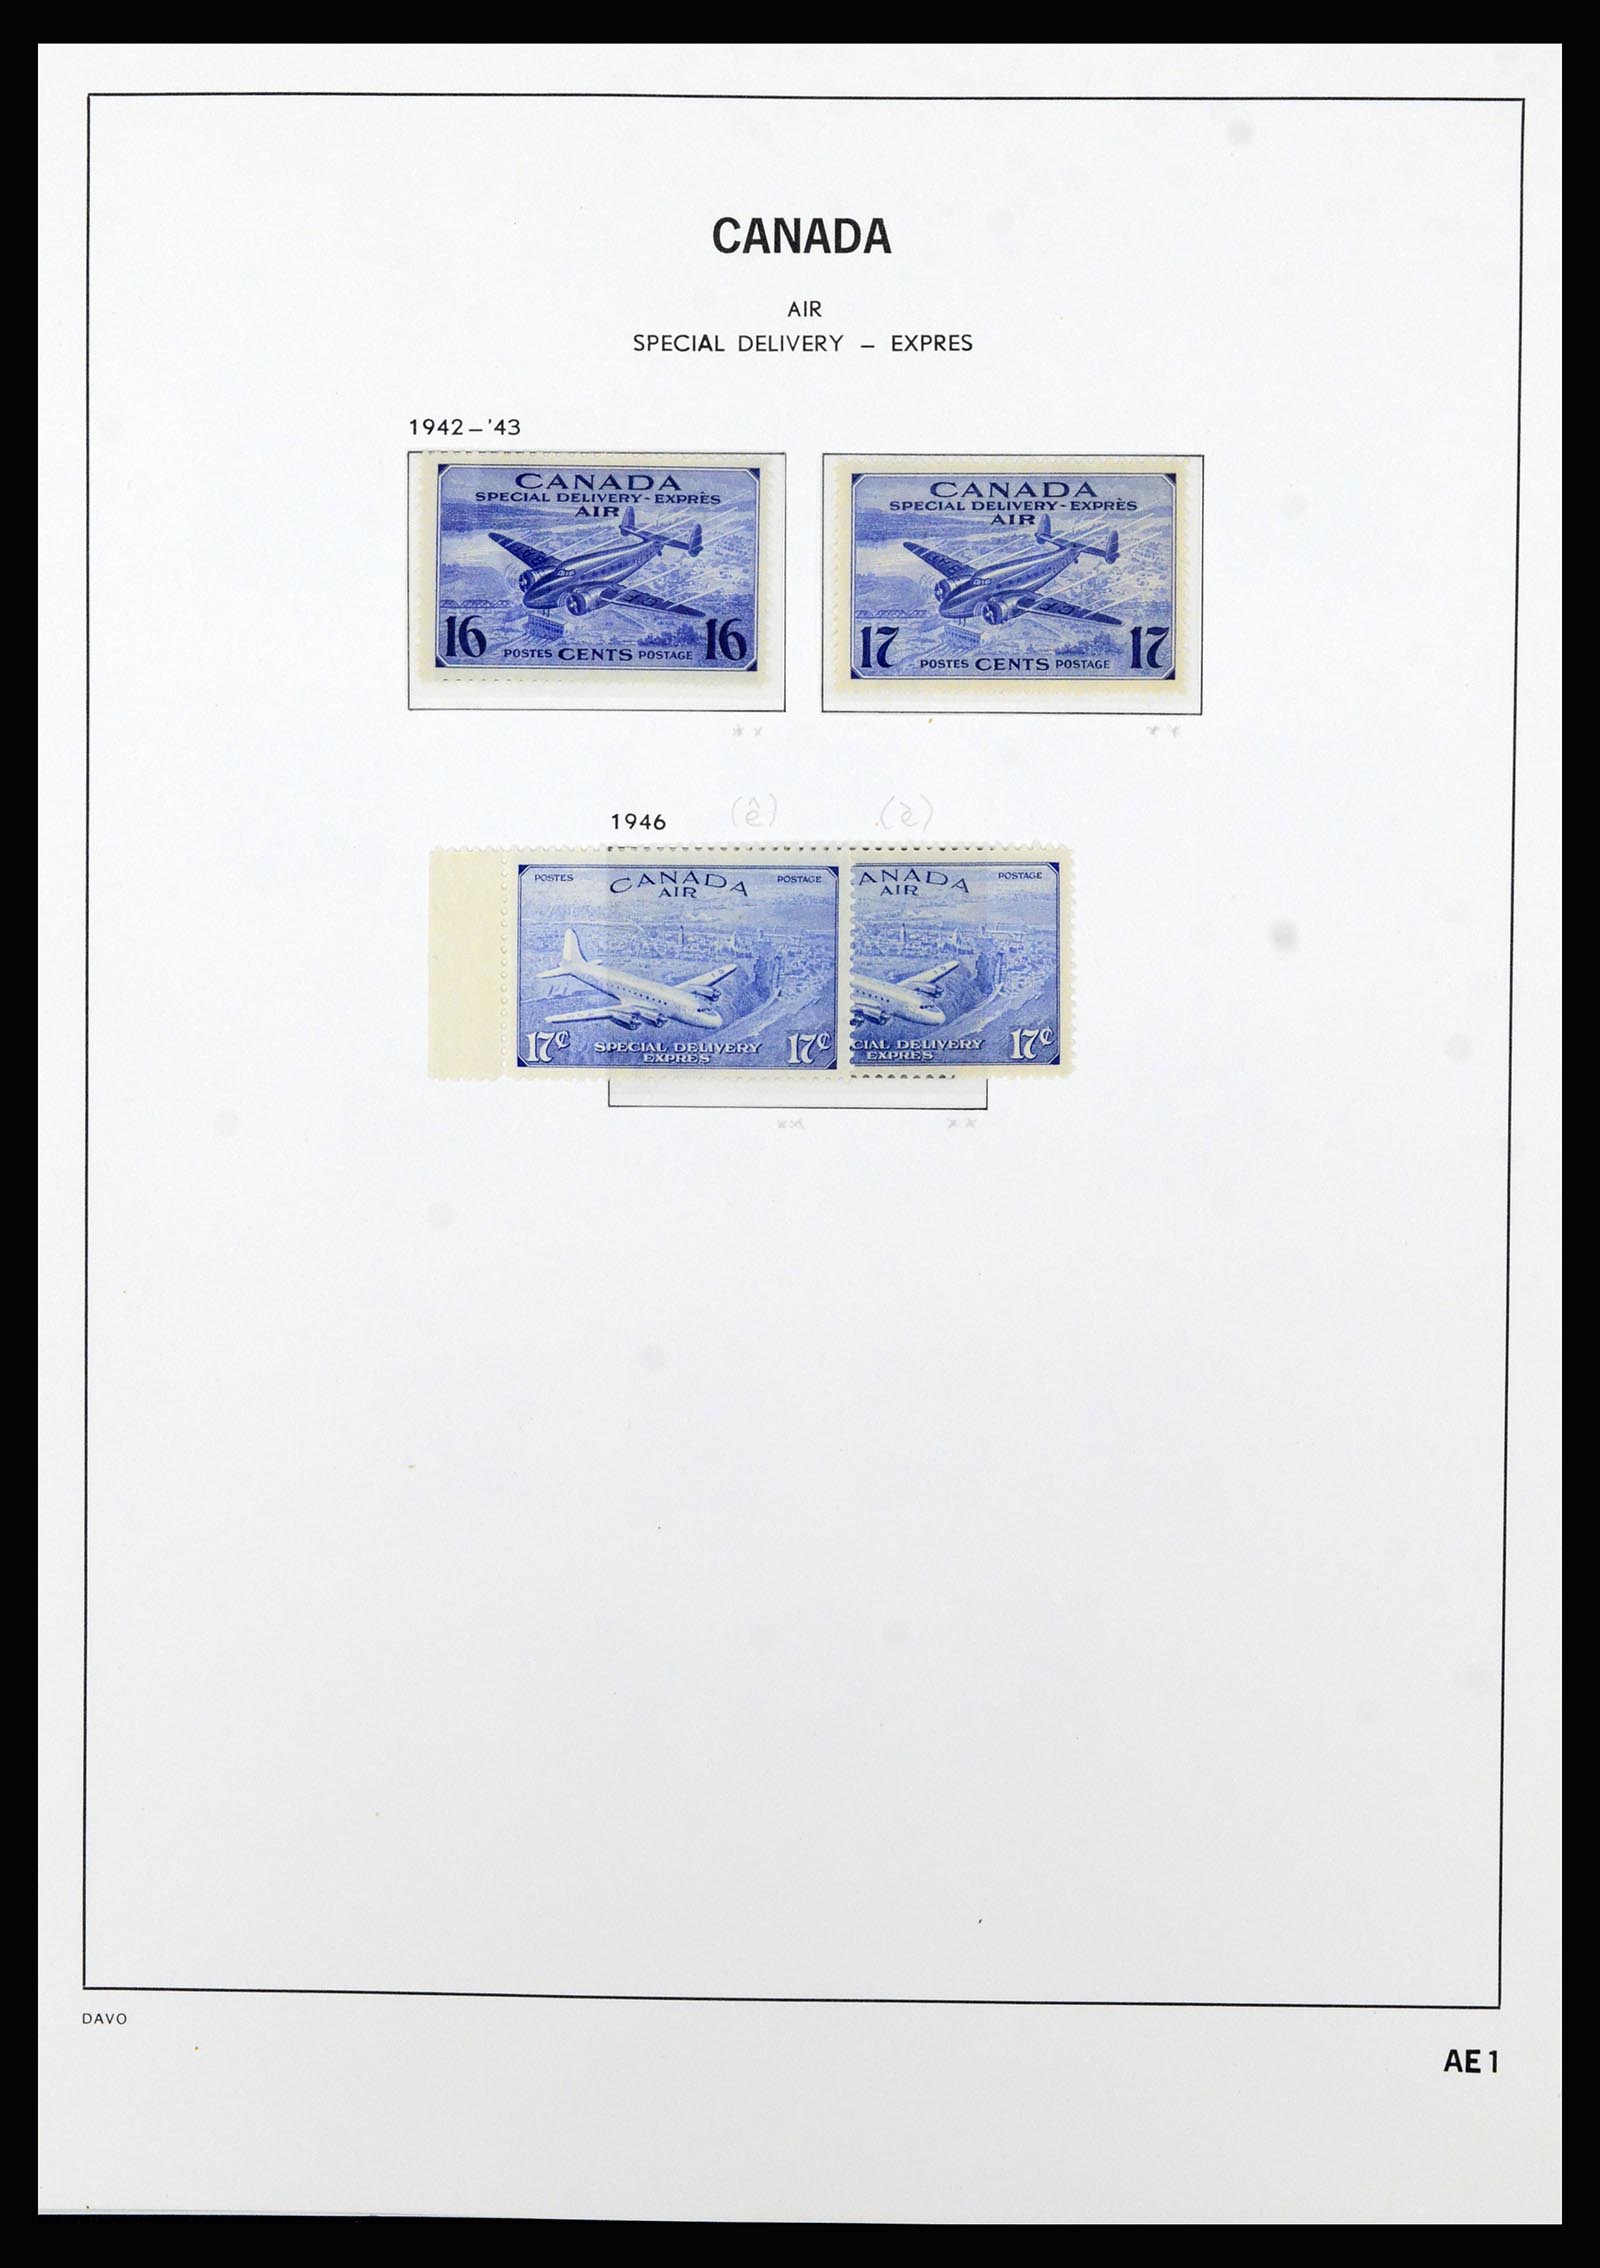 37063 088 - Stamp collection 37063 Canada 1859-1985.